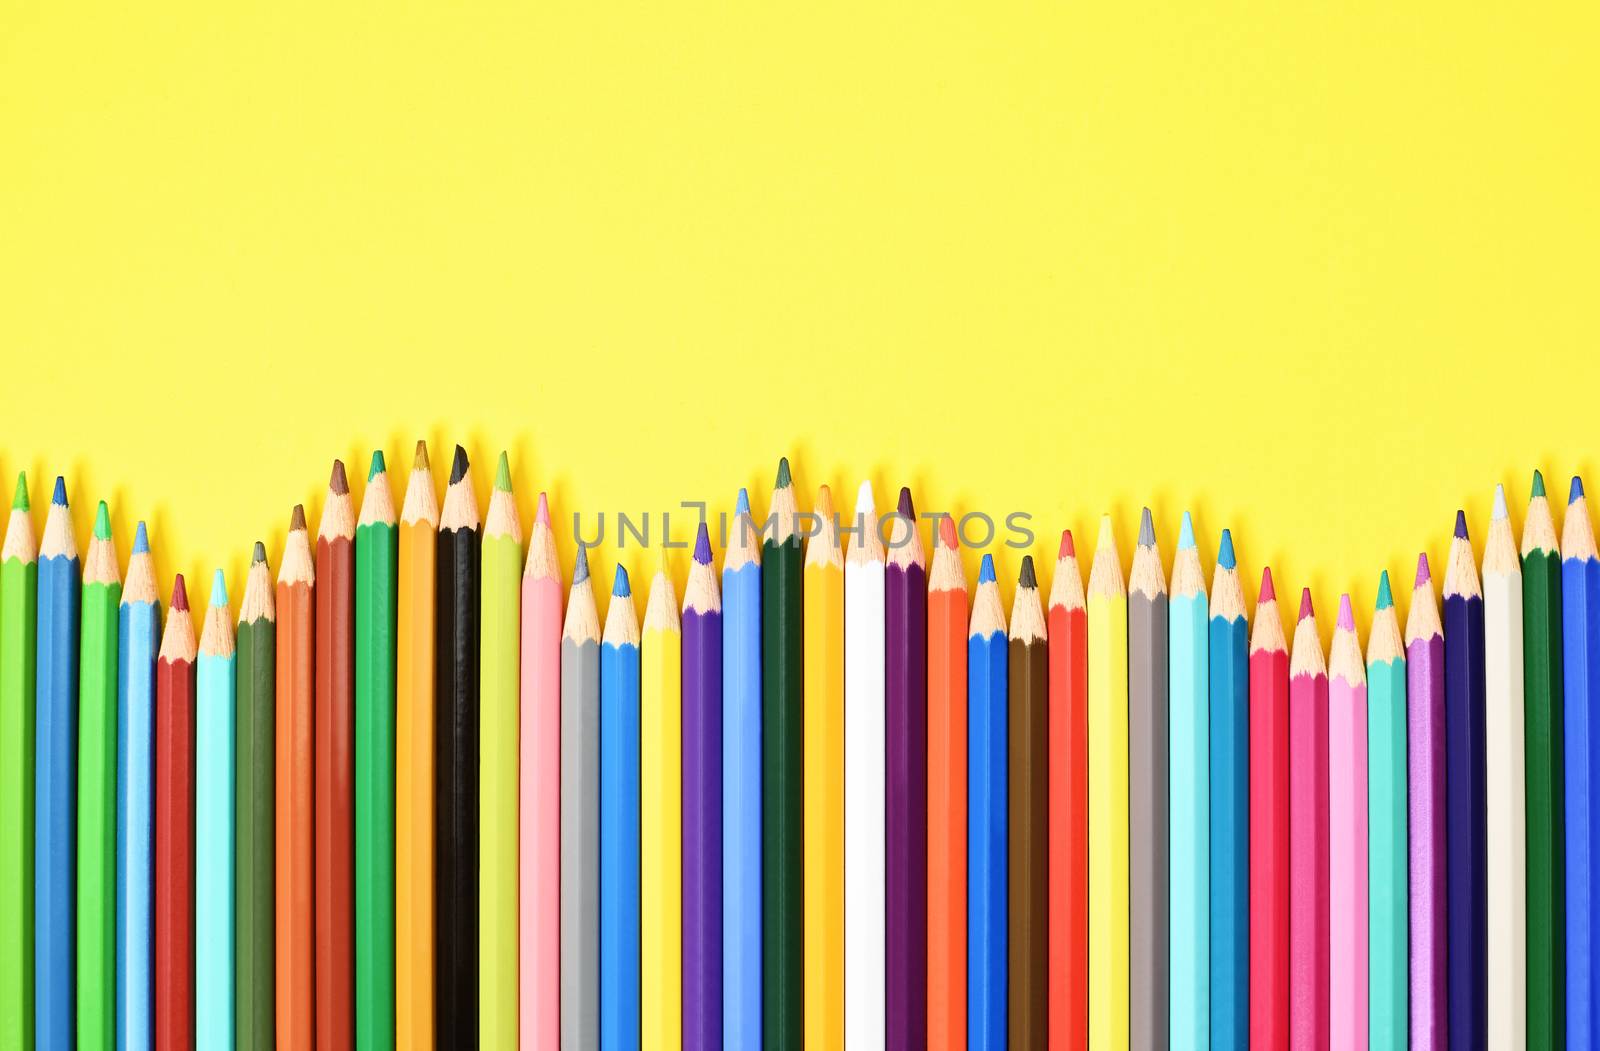 Colorful coloring pencils displayed in a wave on yellow background.